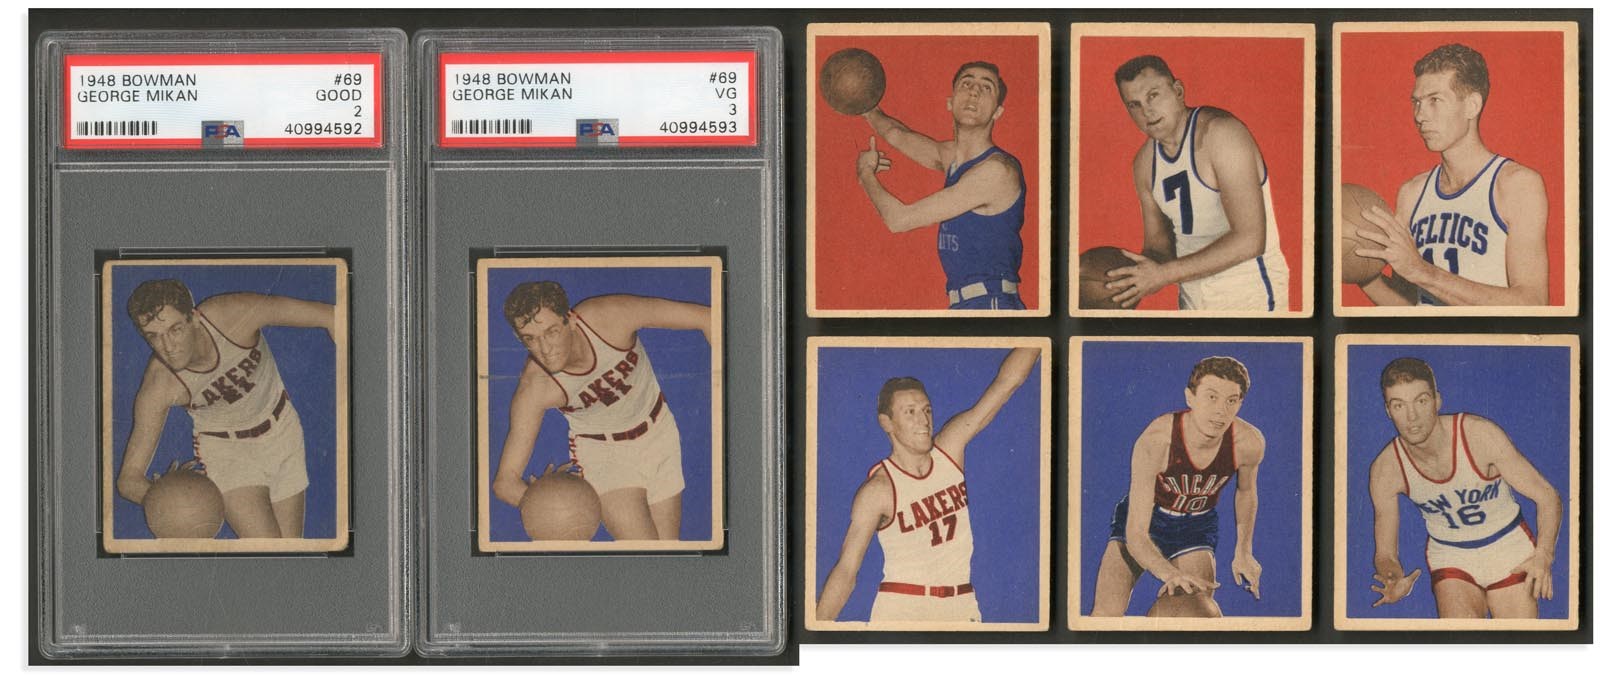 Basketball Cards - 1948 Bowman Basketball Complete Set with (2) PSA Graded Mikan Rookies